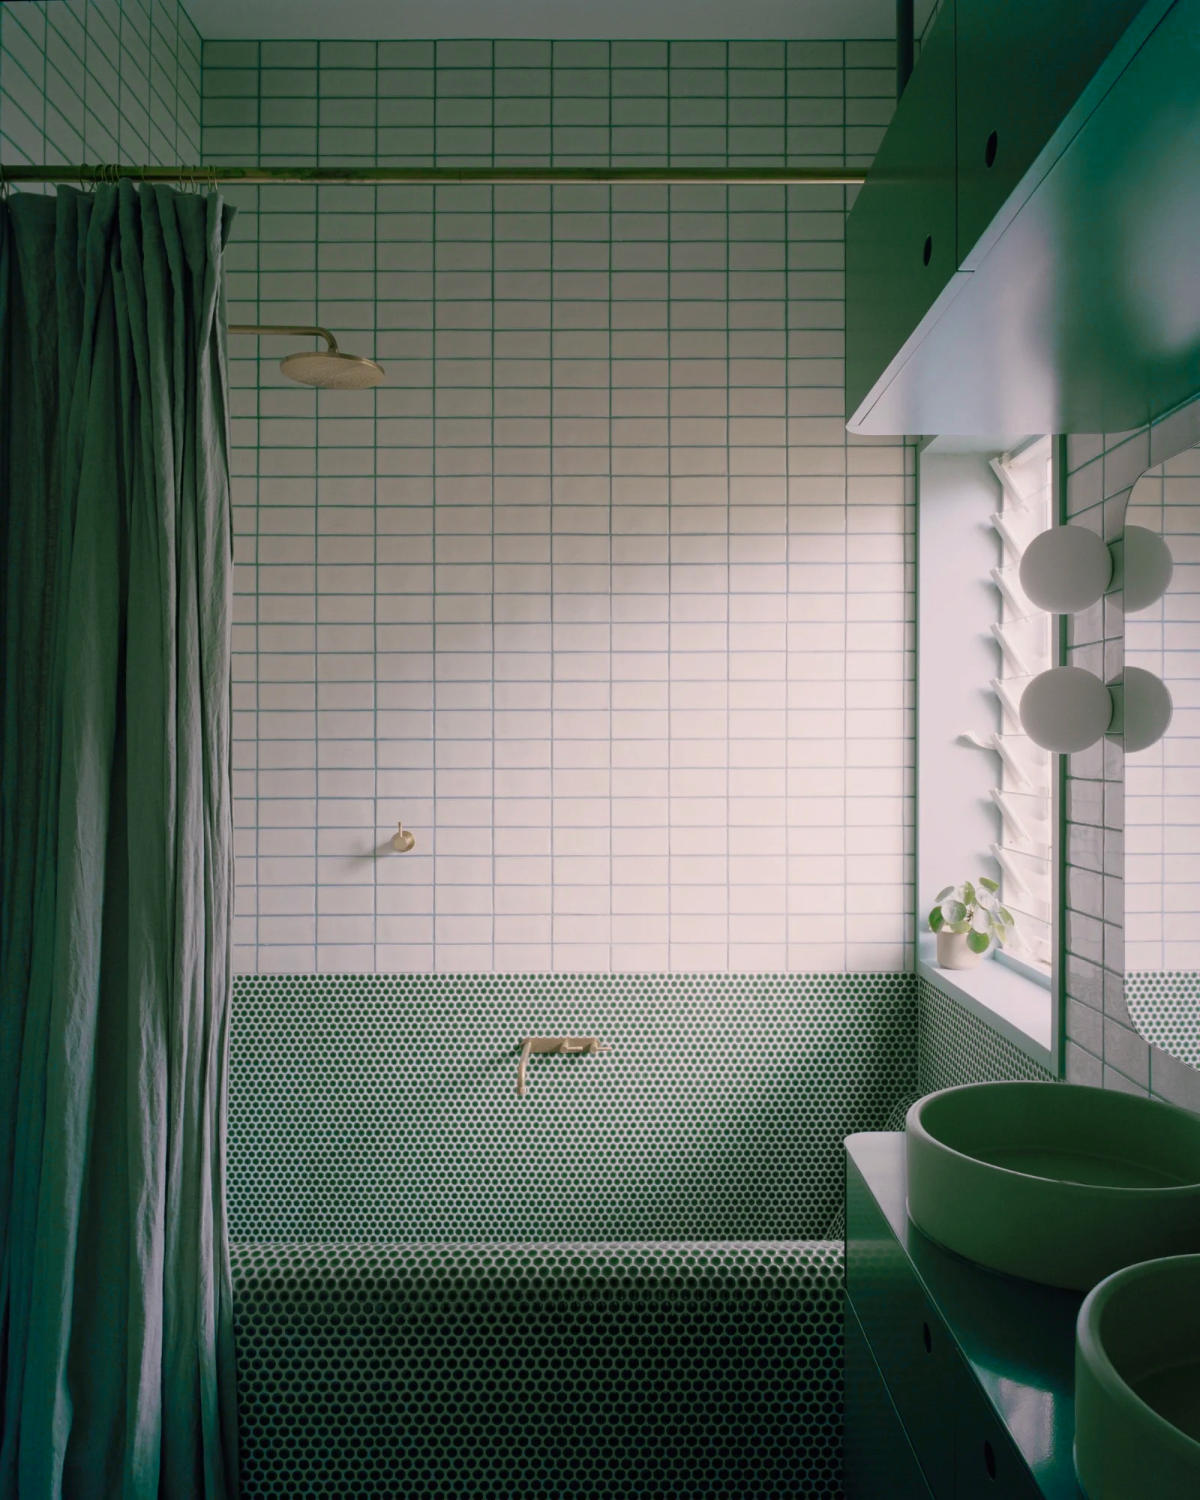 Green mosaic tiles smoothly wrap around this built-in bathtub to create a bespoke finish.